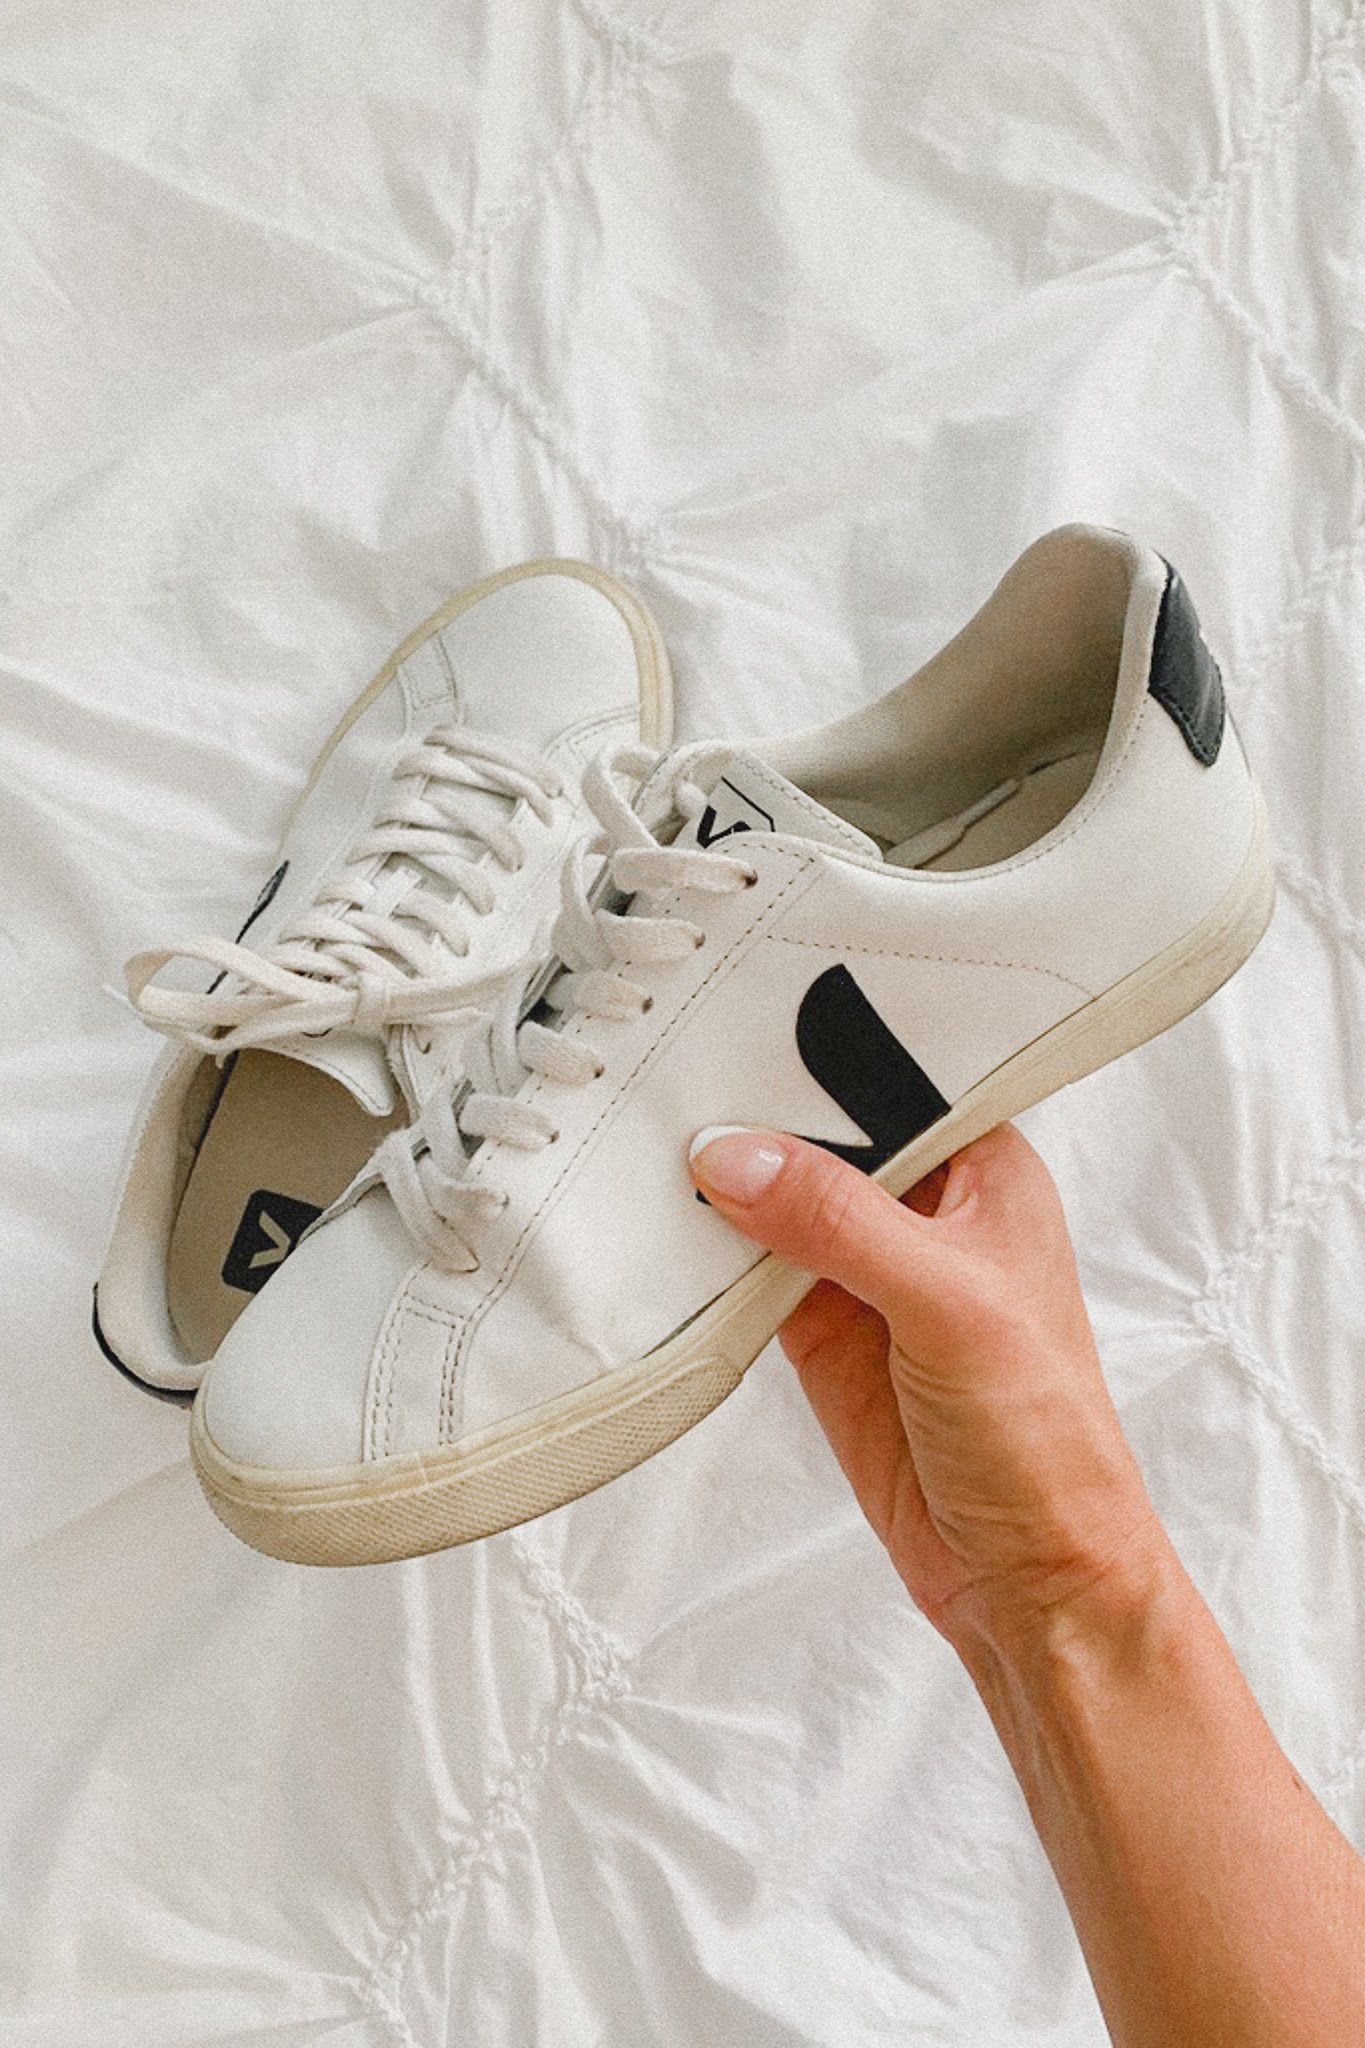 4 Timeless Designer Sneakers You Should Own | Luxe Beat Magazine